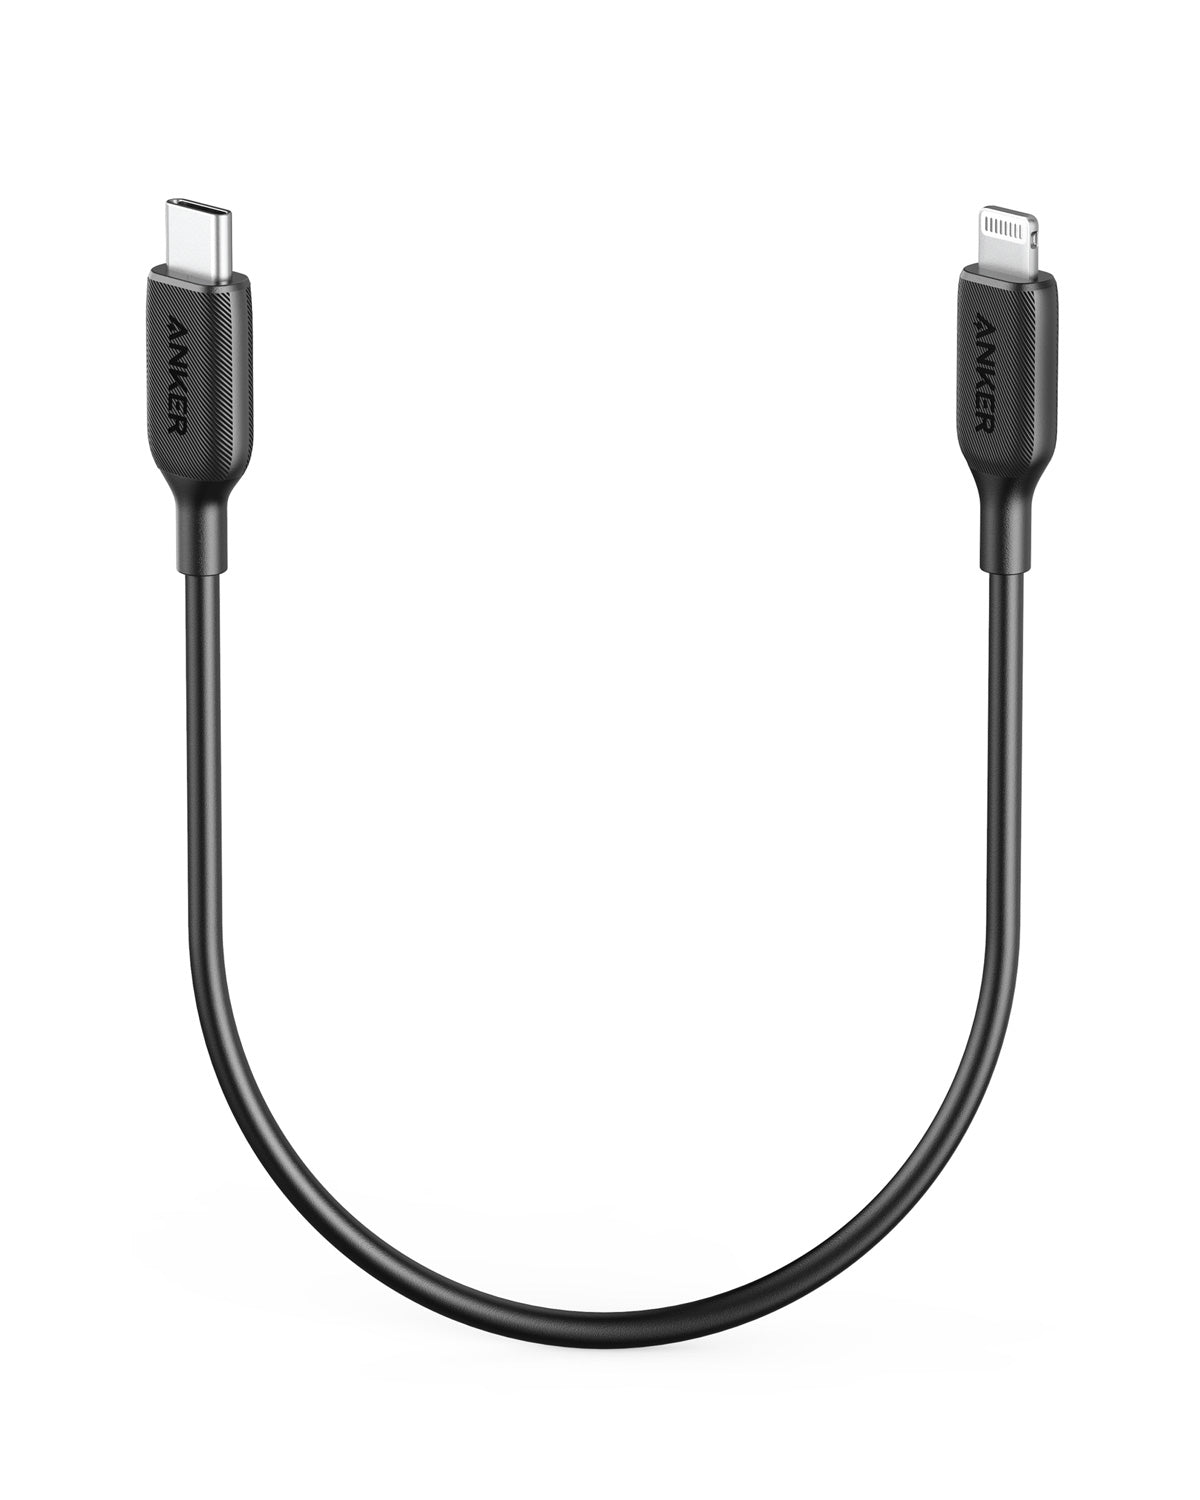 Photos - Cable (video, audio, USB) ANKER 541 USB-C to Lightning Cable  1ft / Black A8831011 (1ft / 3ft / 6ft)